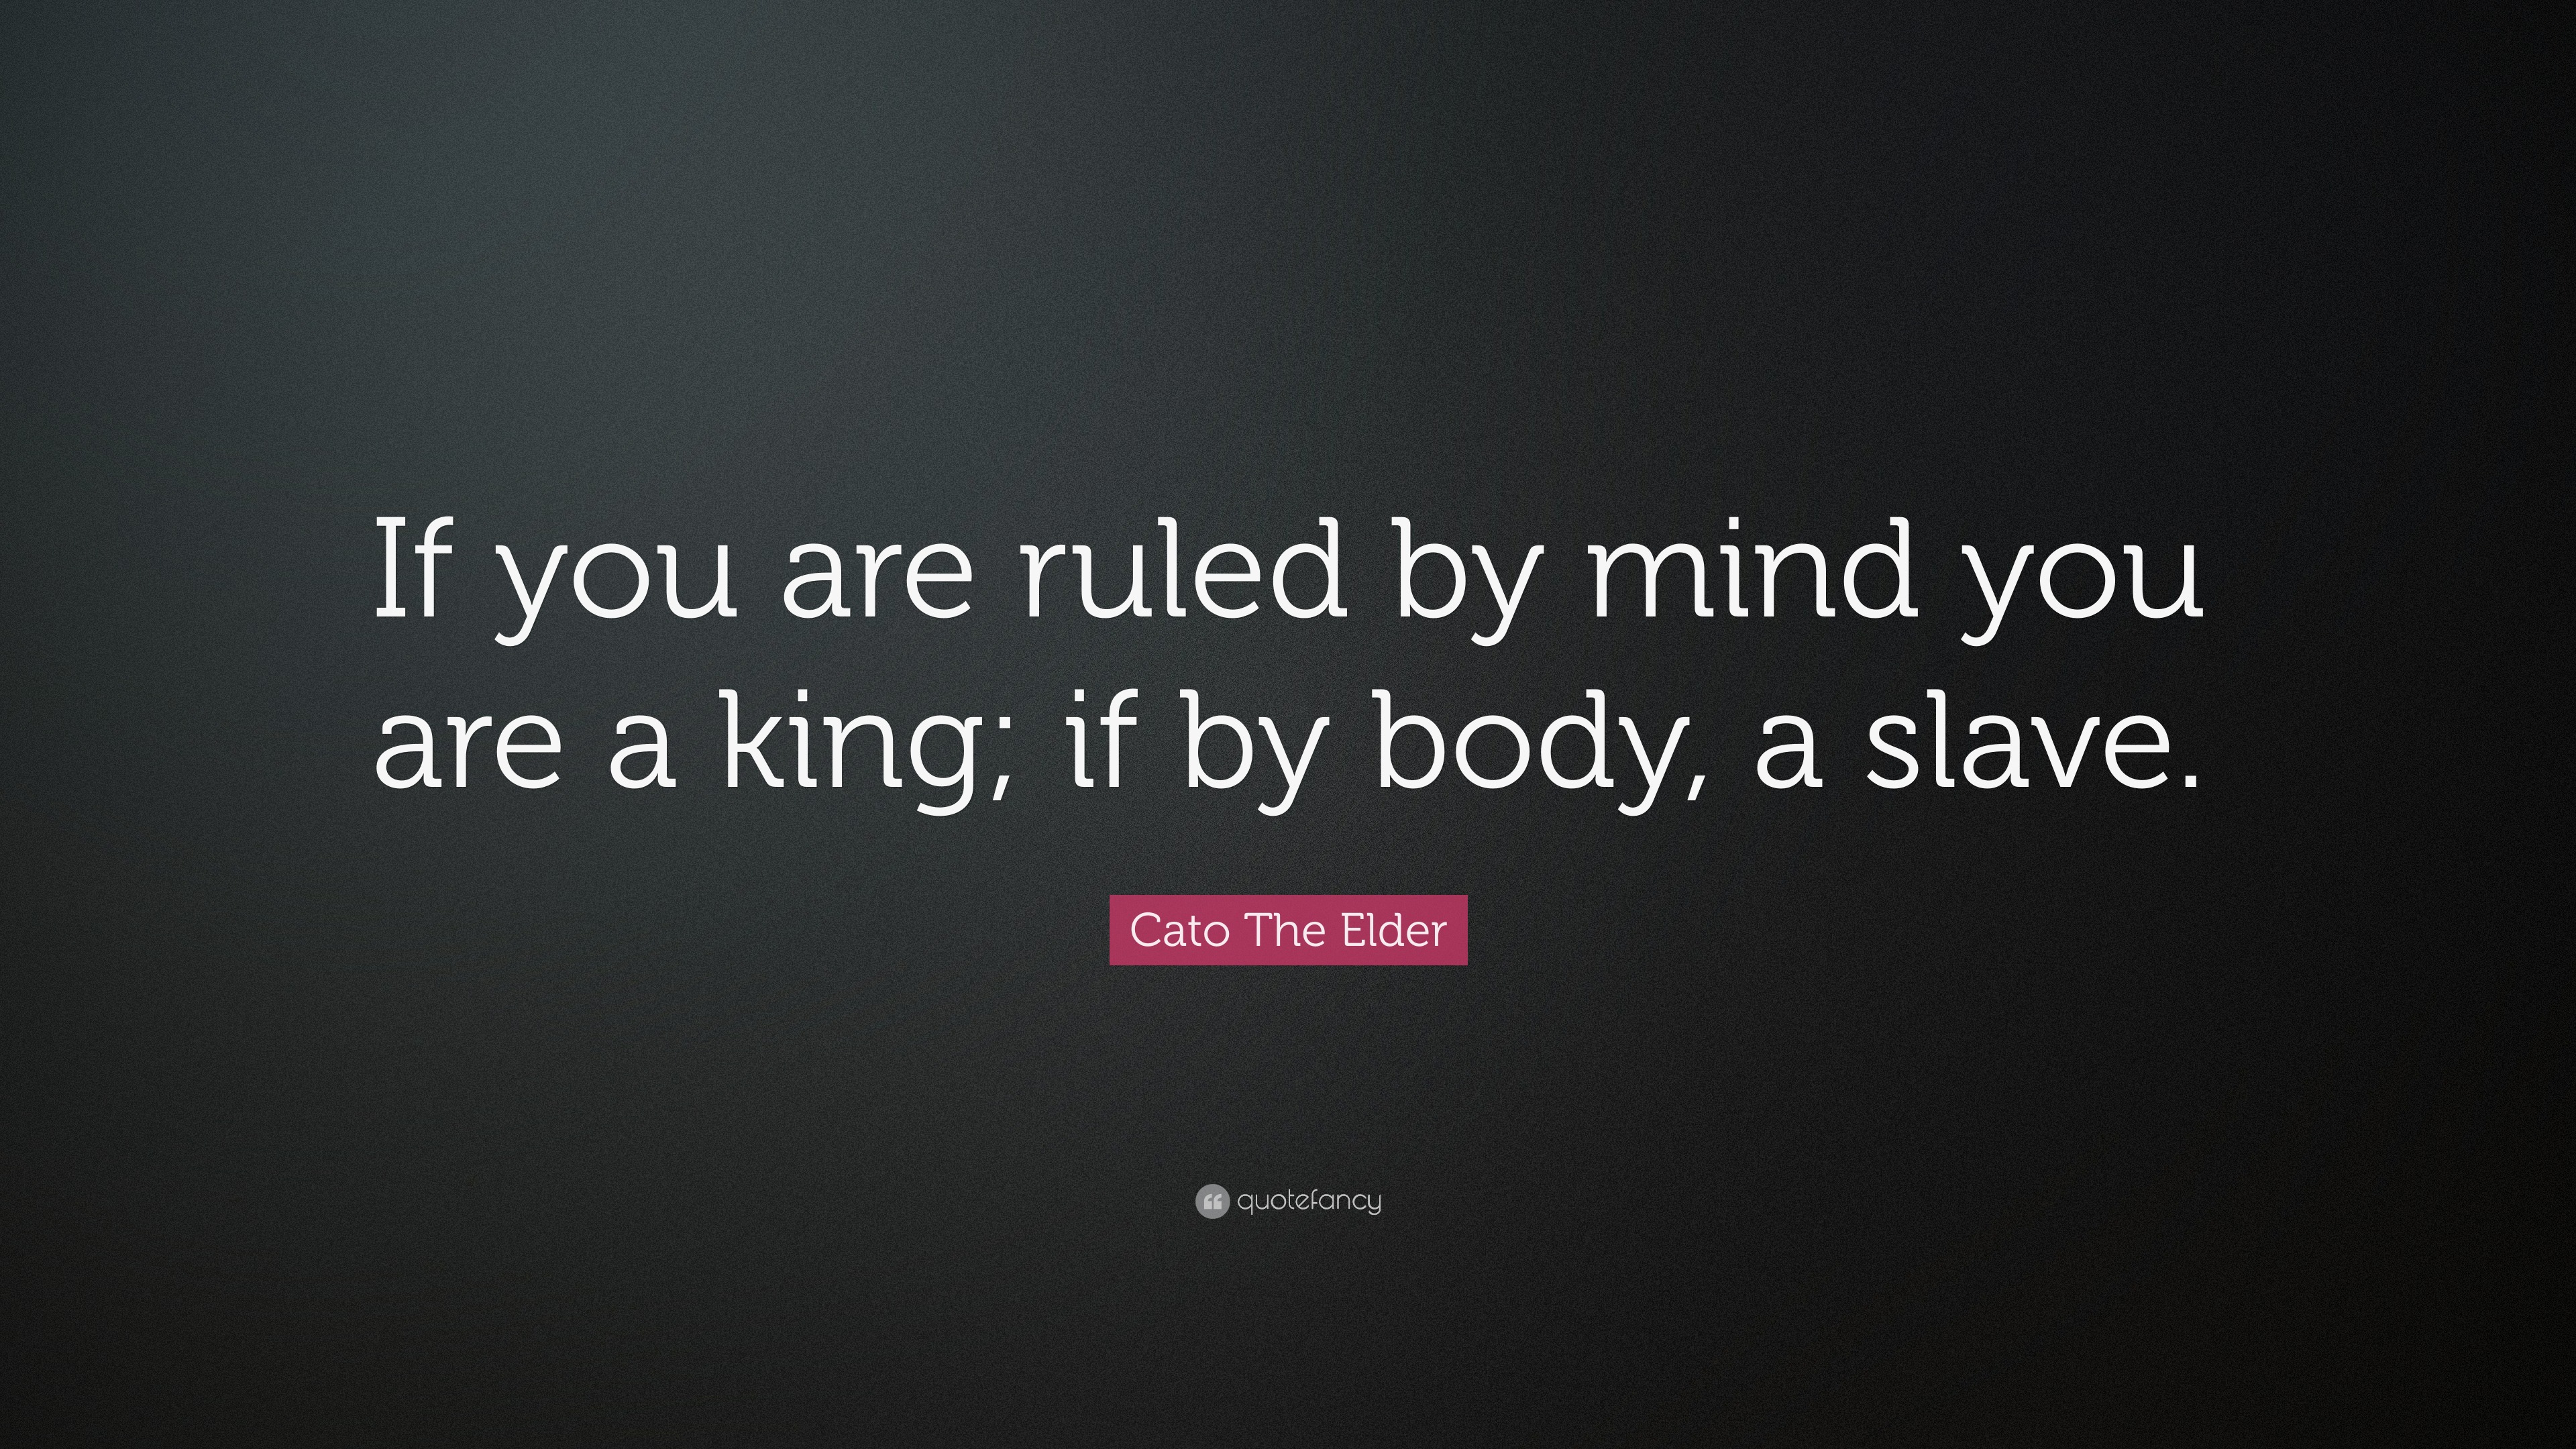 Cato The Elder Quote If You Are Ruled By Mind You Are A King If By Body A Slave 7 Wallpapers Quotefancy